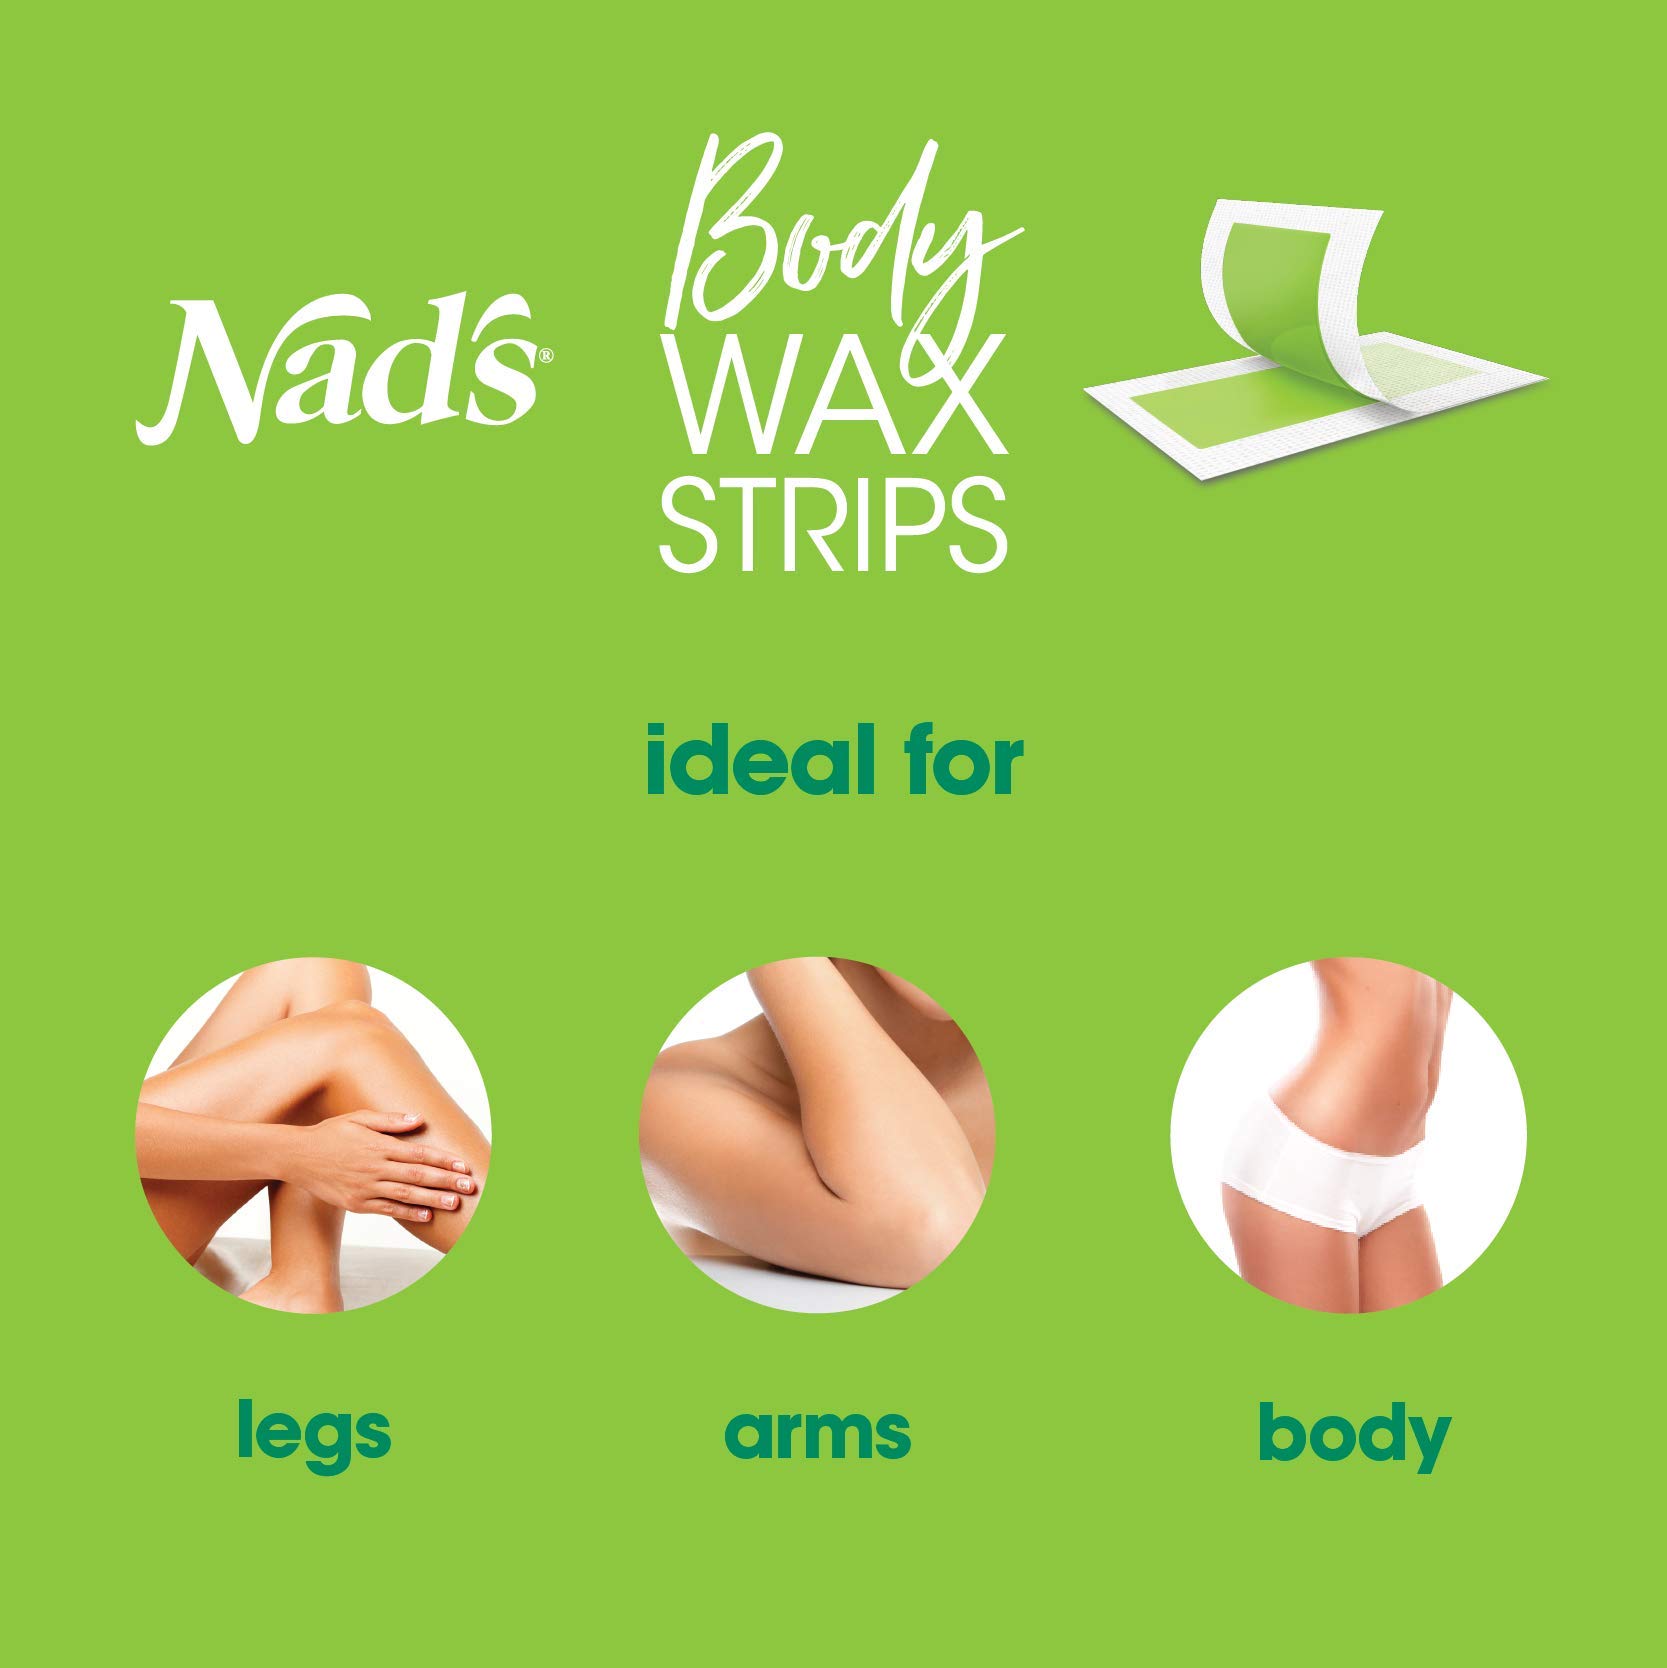 Nad's Body Wax Strips Hair Removal For Women At Home plus 4 Calming Oil Wipes, 24 Count